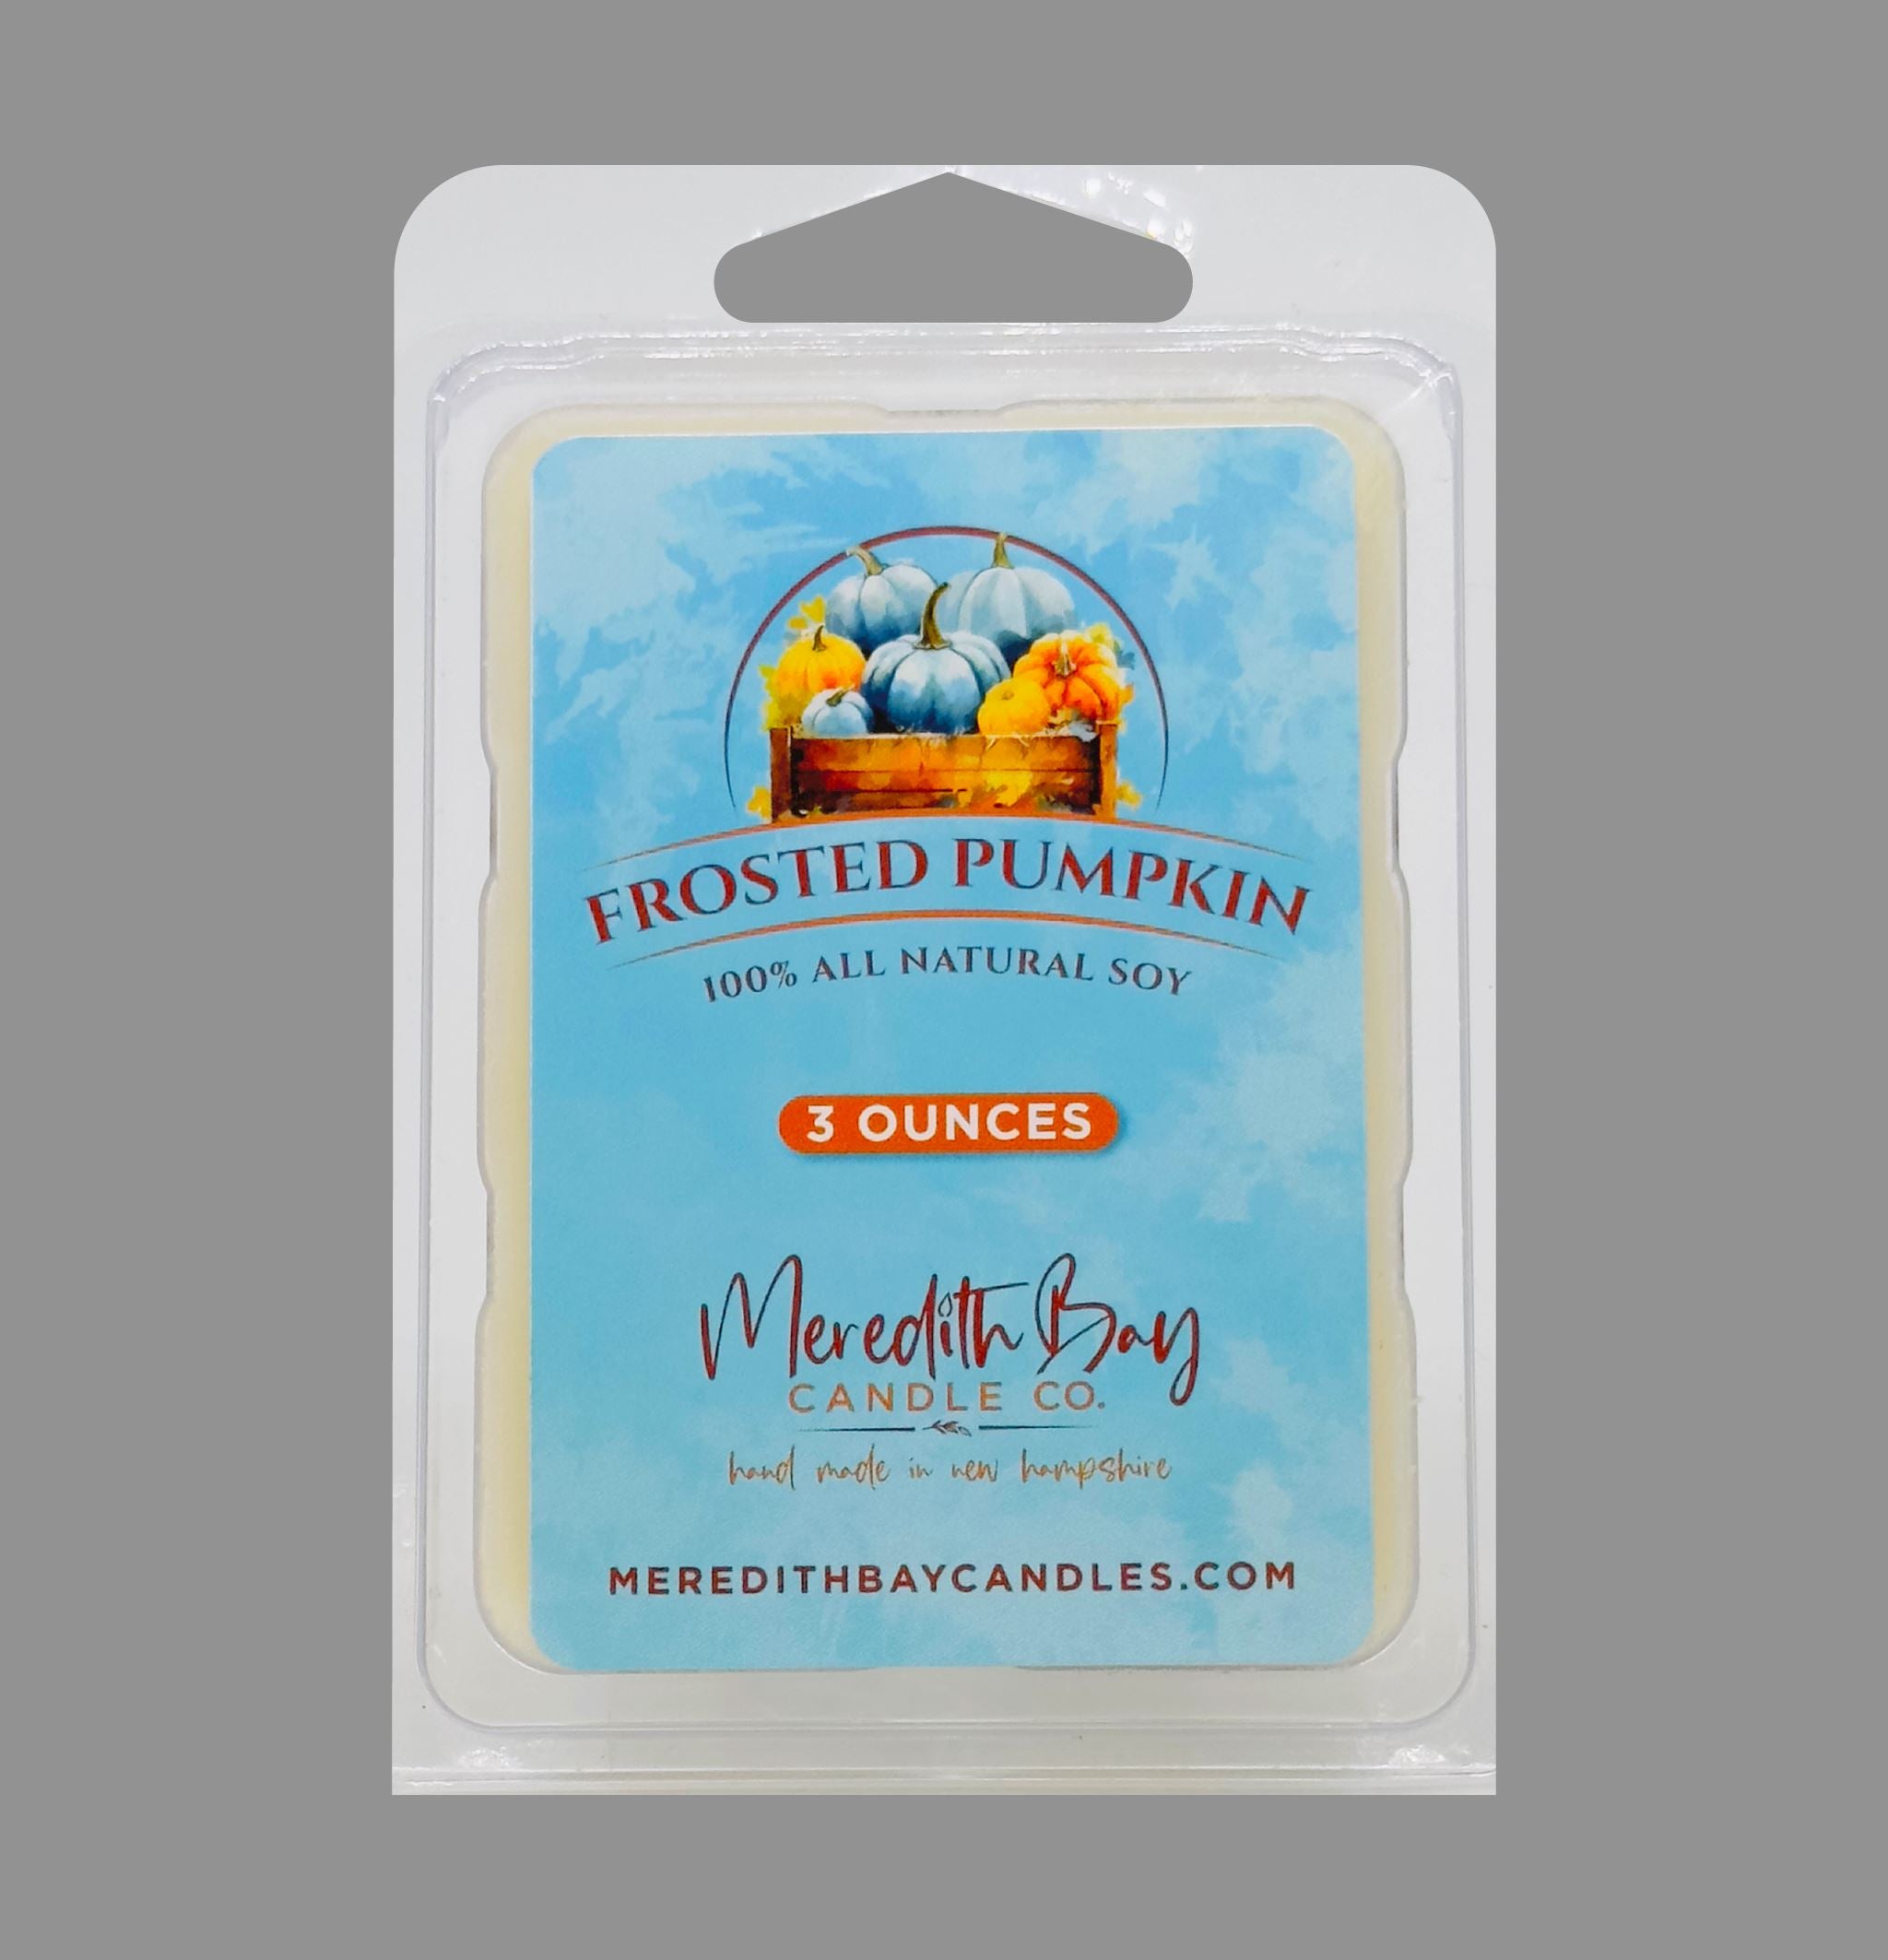 Frosted Pumpkin Wax Melt Meredith Bay Candle Co 